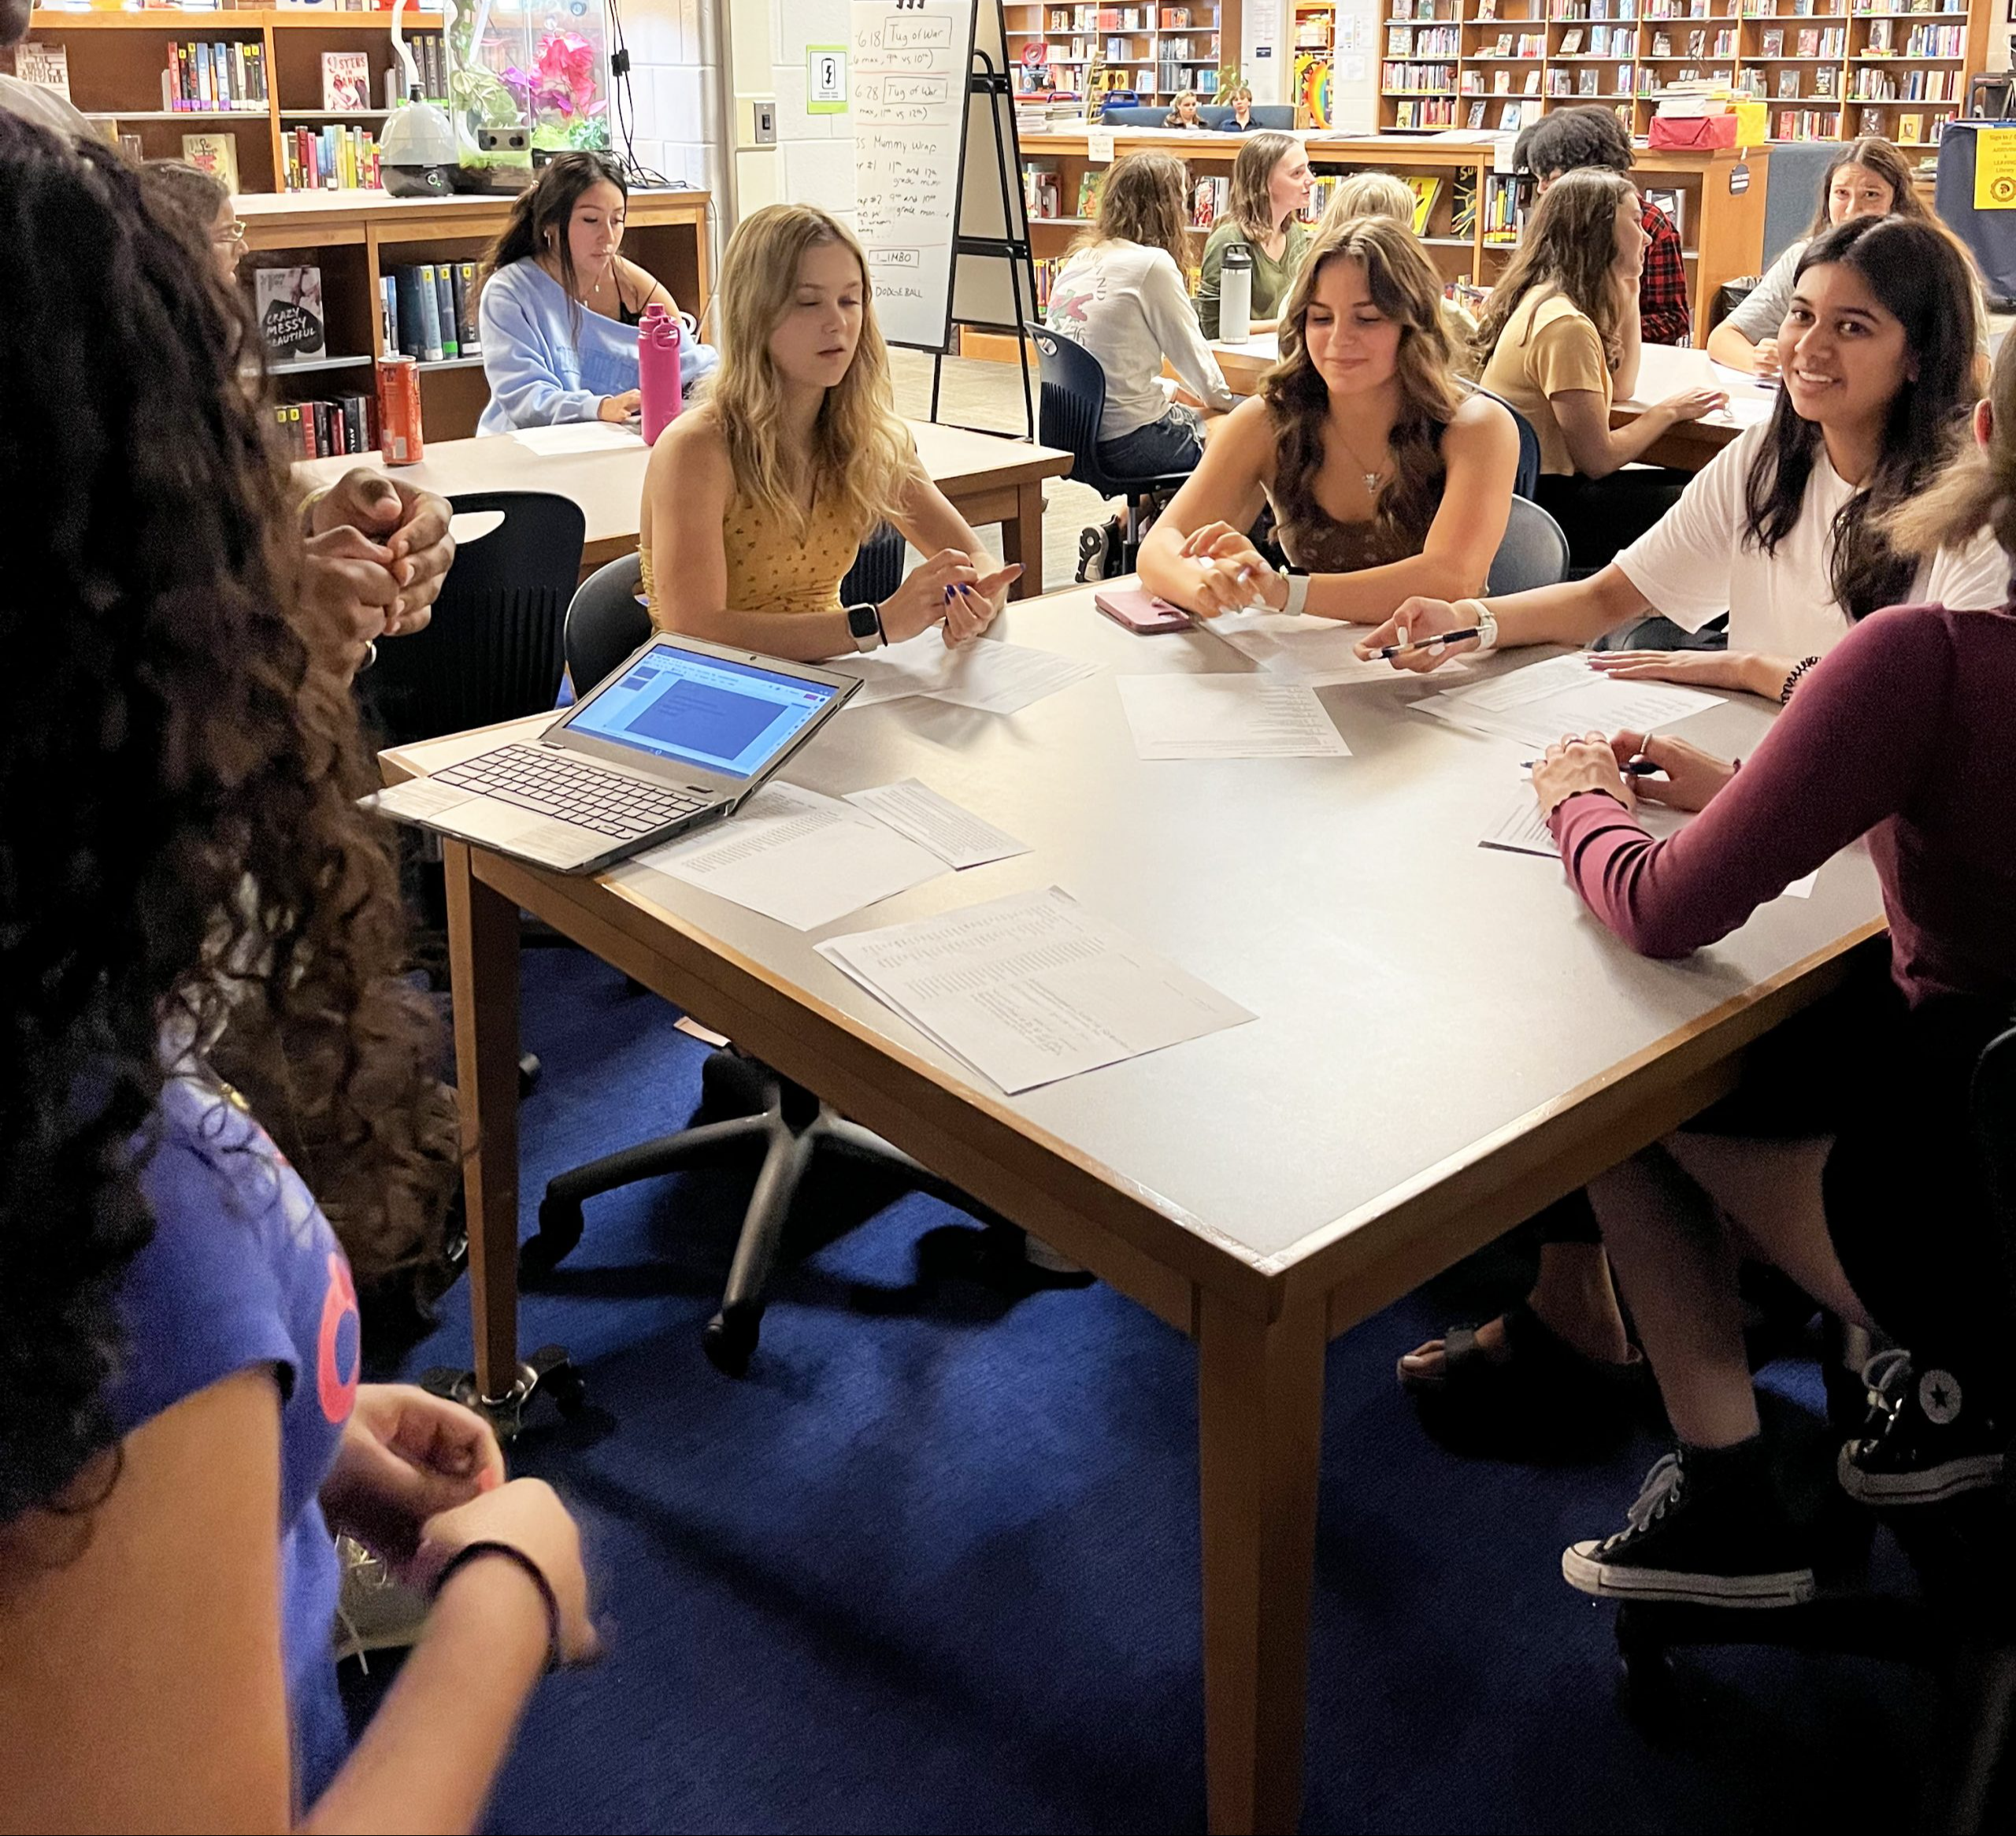 Several students at a table in the library working together.